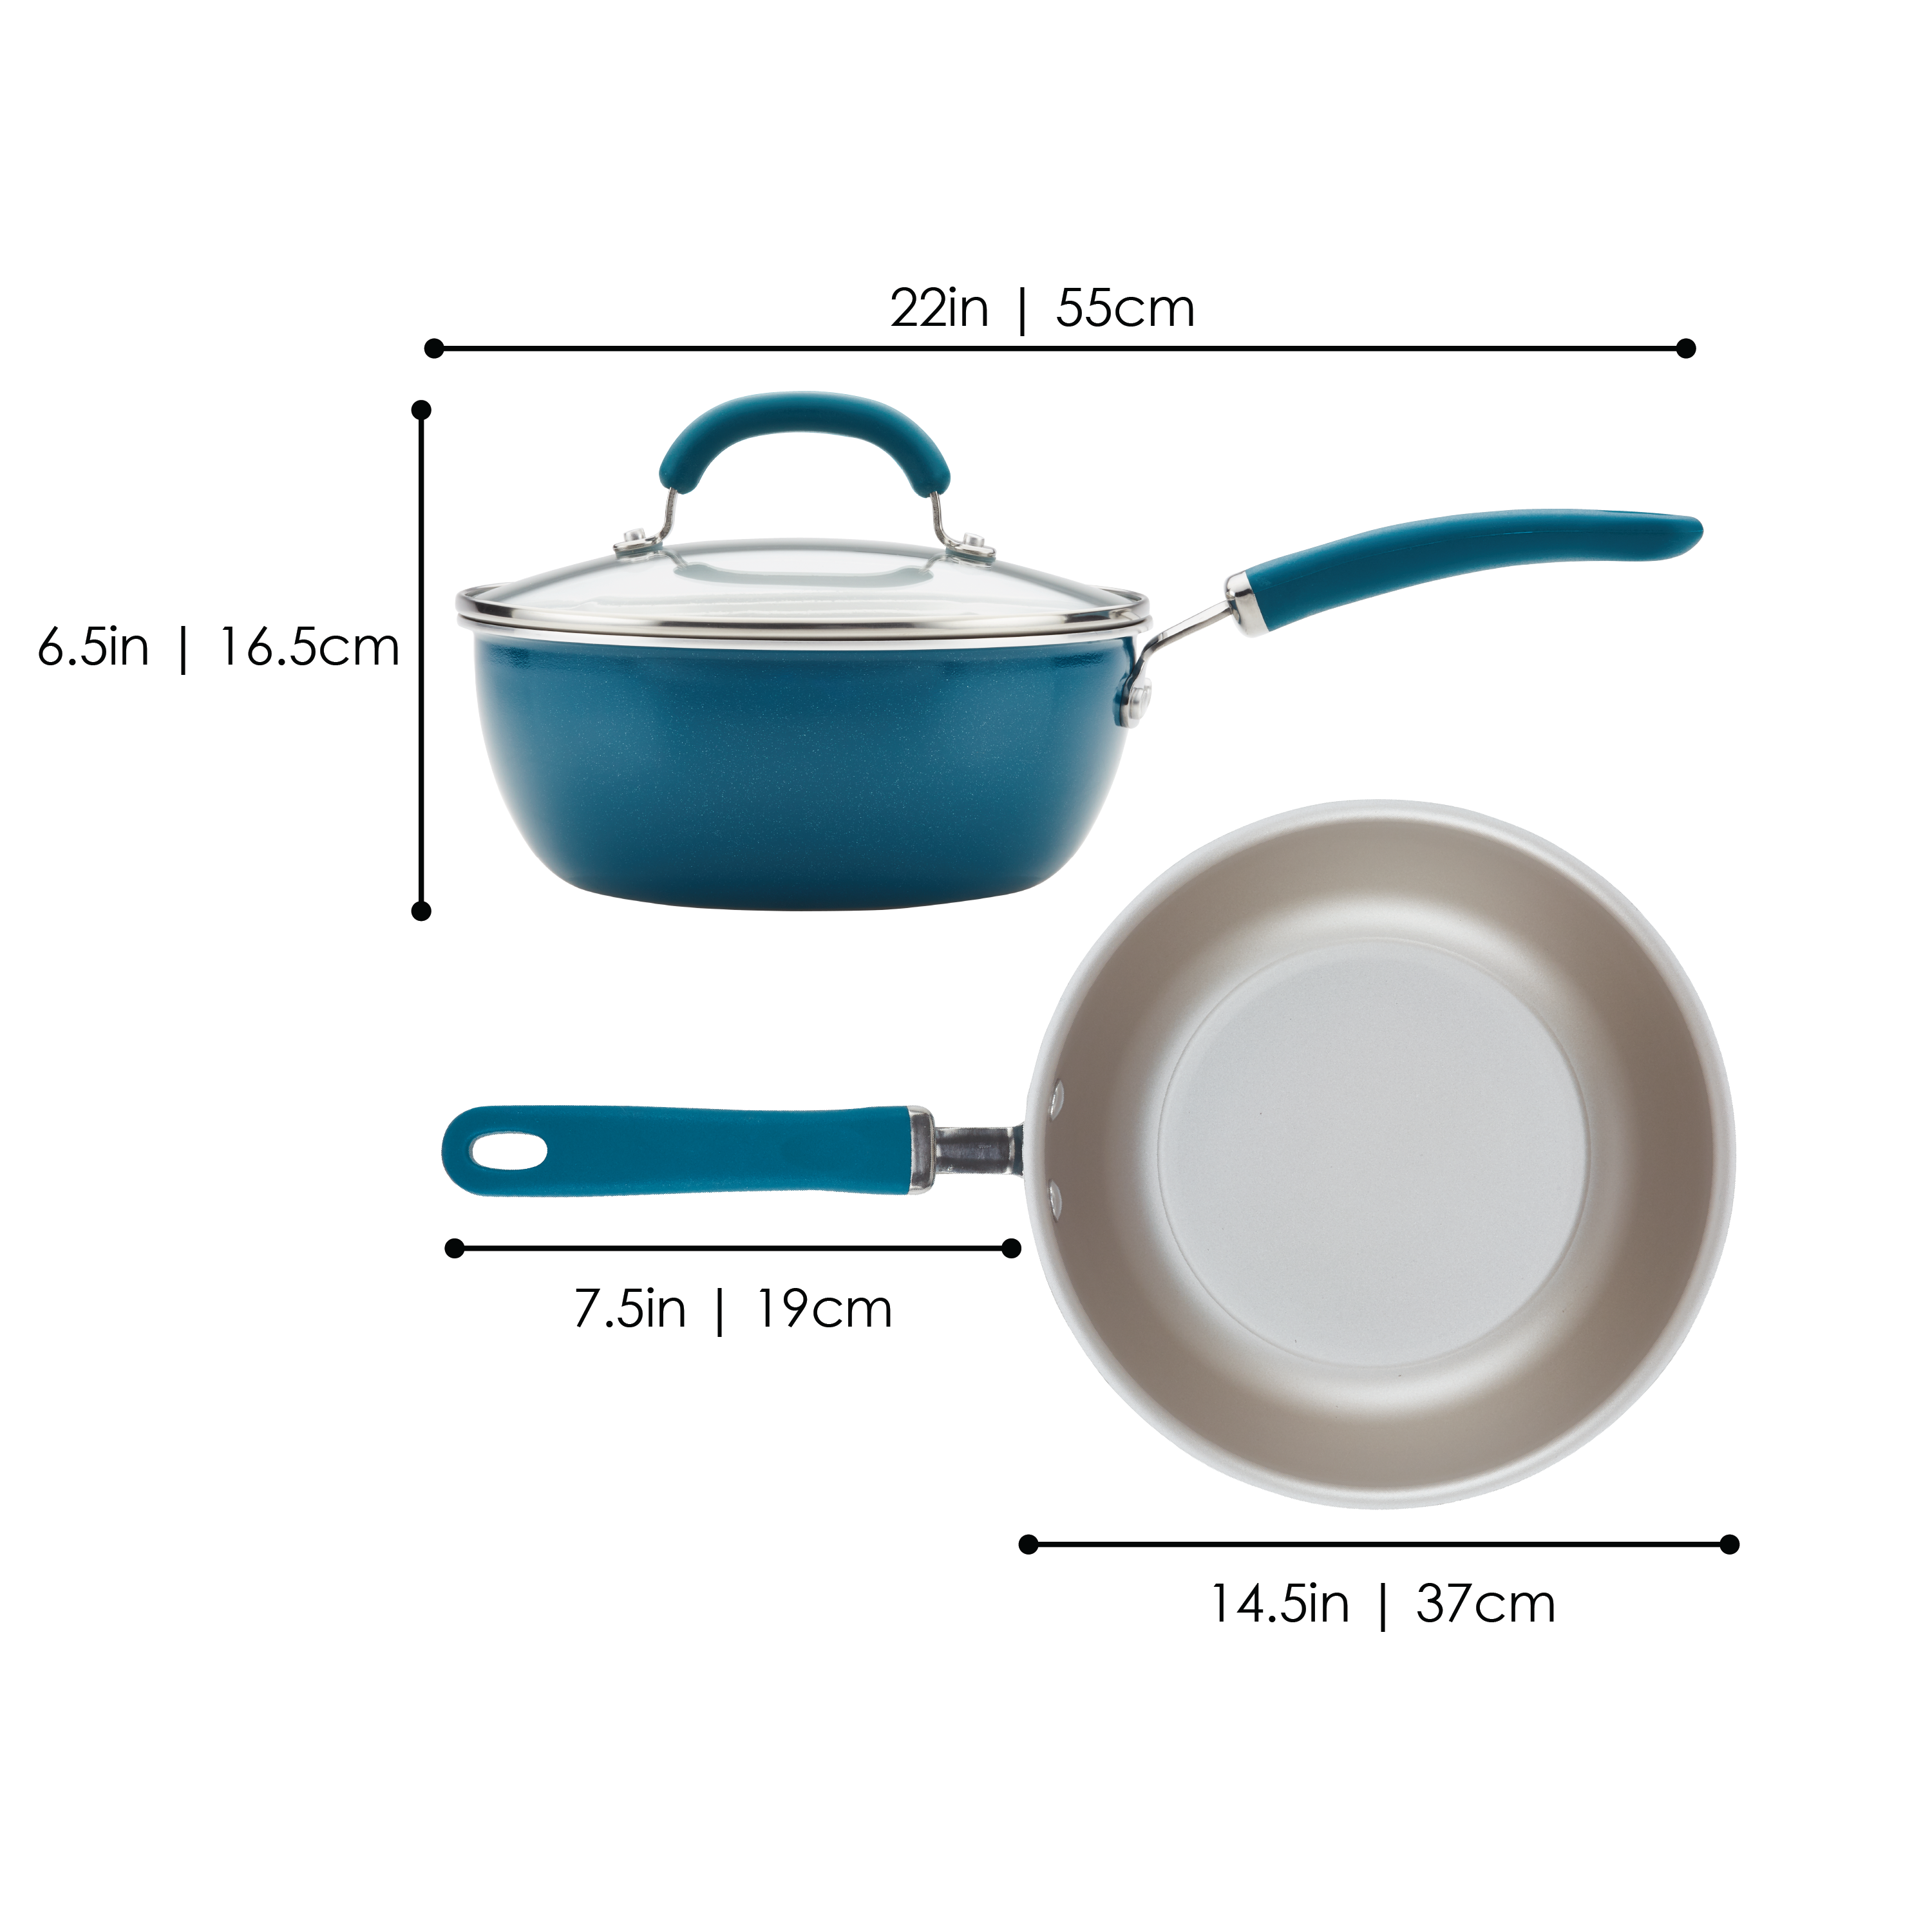 Rachael Ray Create Delicious Nonstick Cookware Pots and Pans Set, 13 Piece,  Light Blue Shimmer